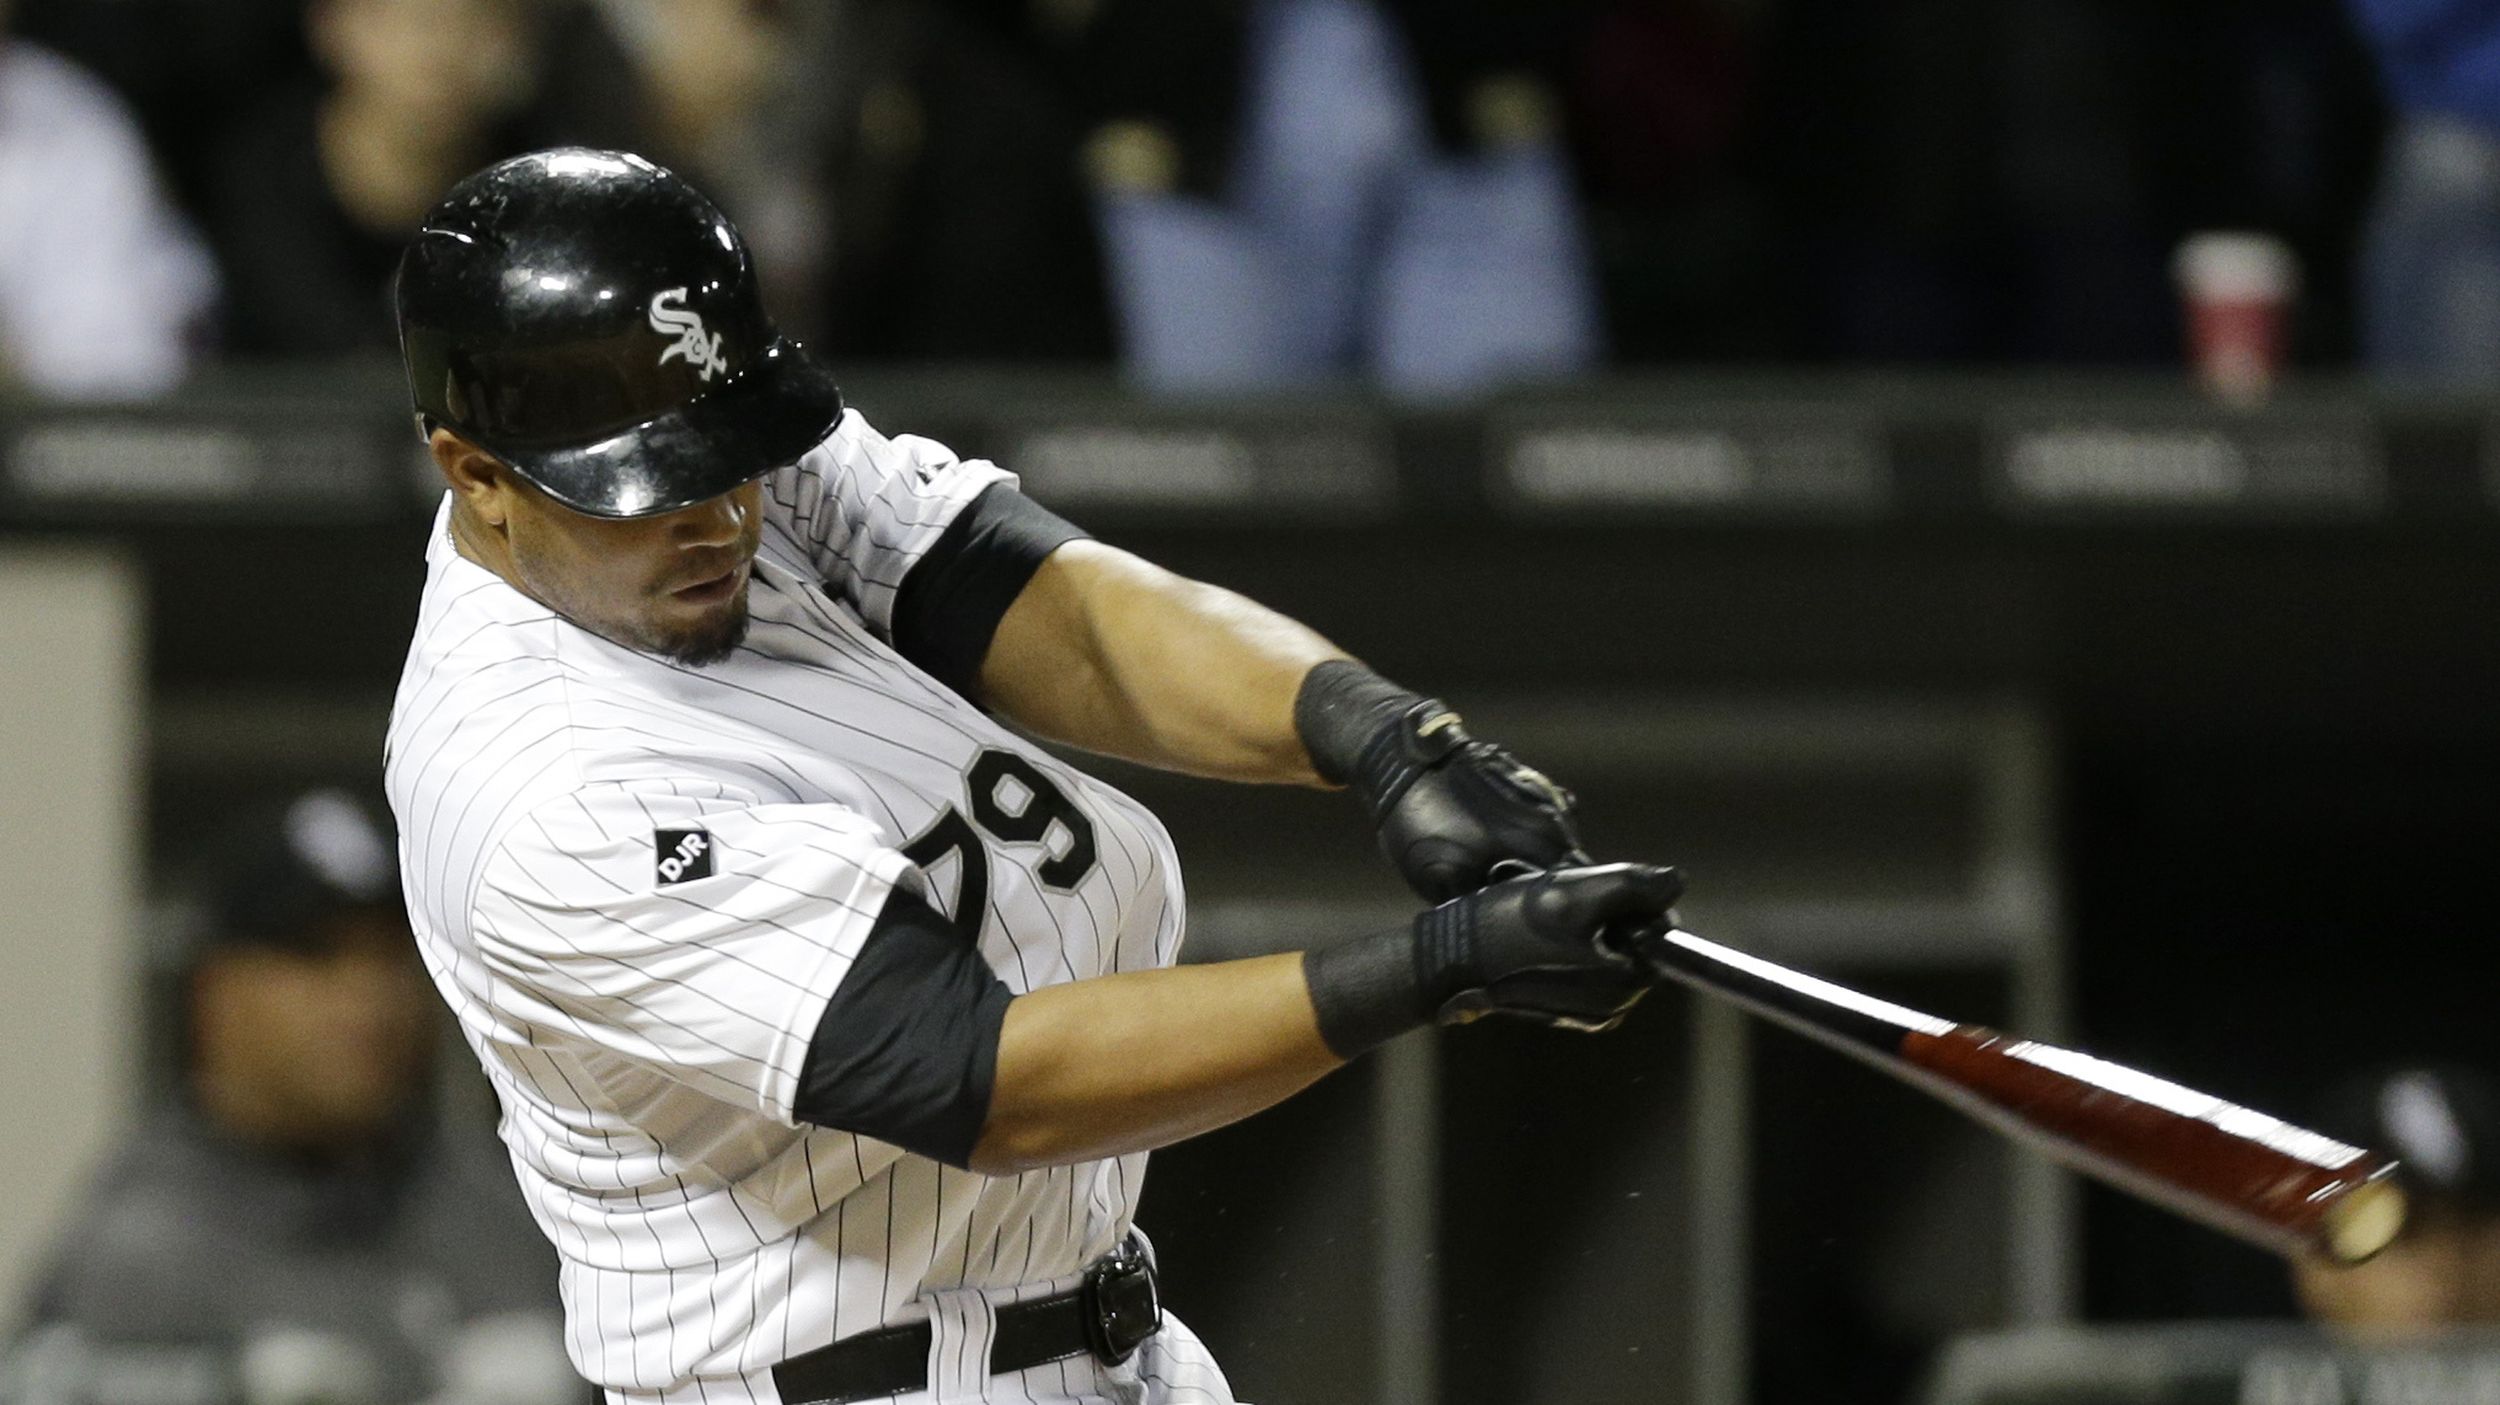 Jose Abreu is one of only 25 players in MLB history to have a